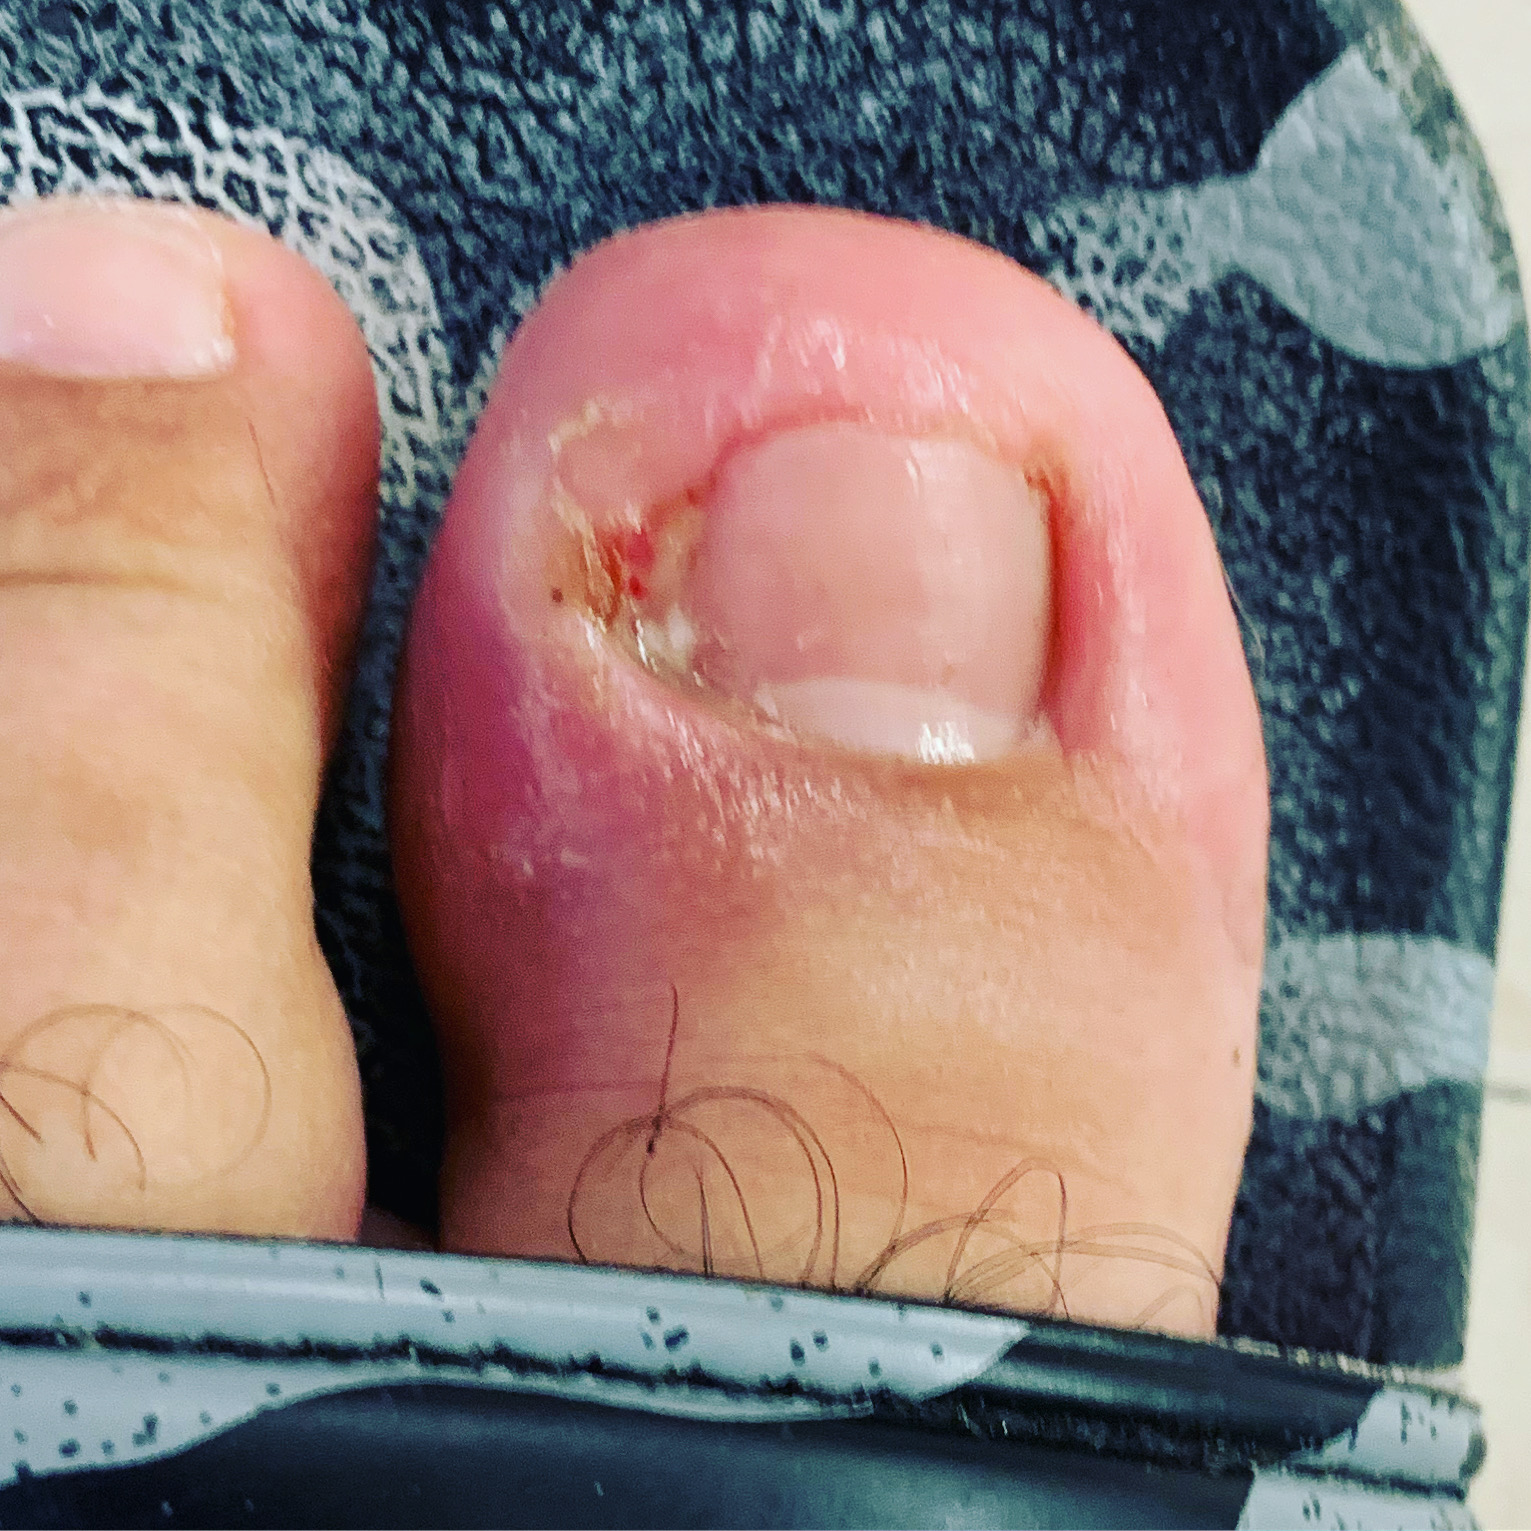 When To See A Physician After Painful Toenail Injury